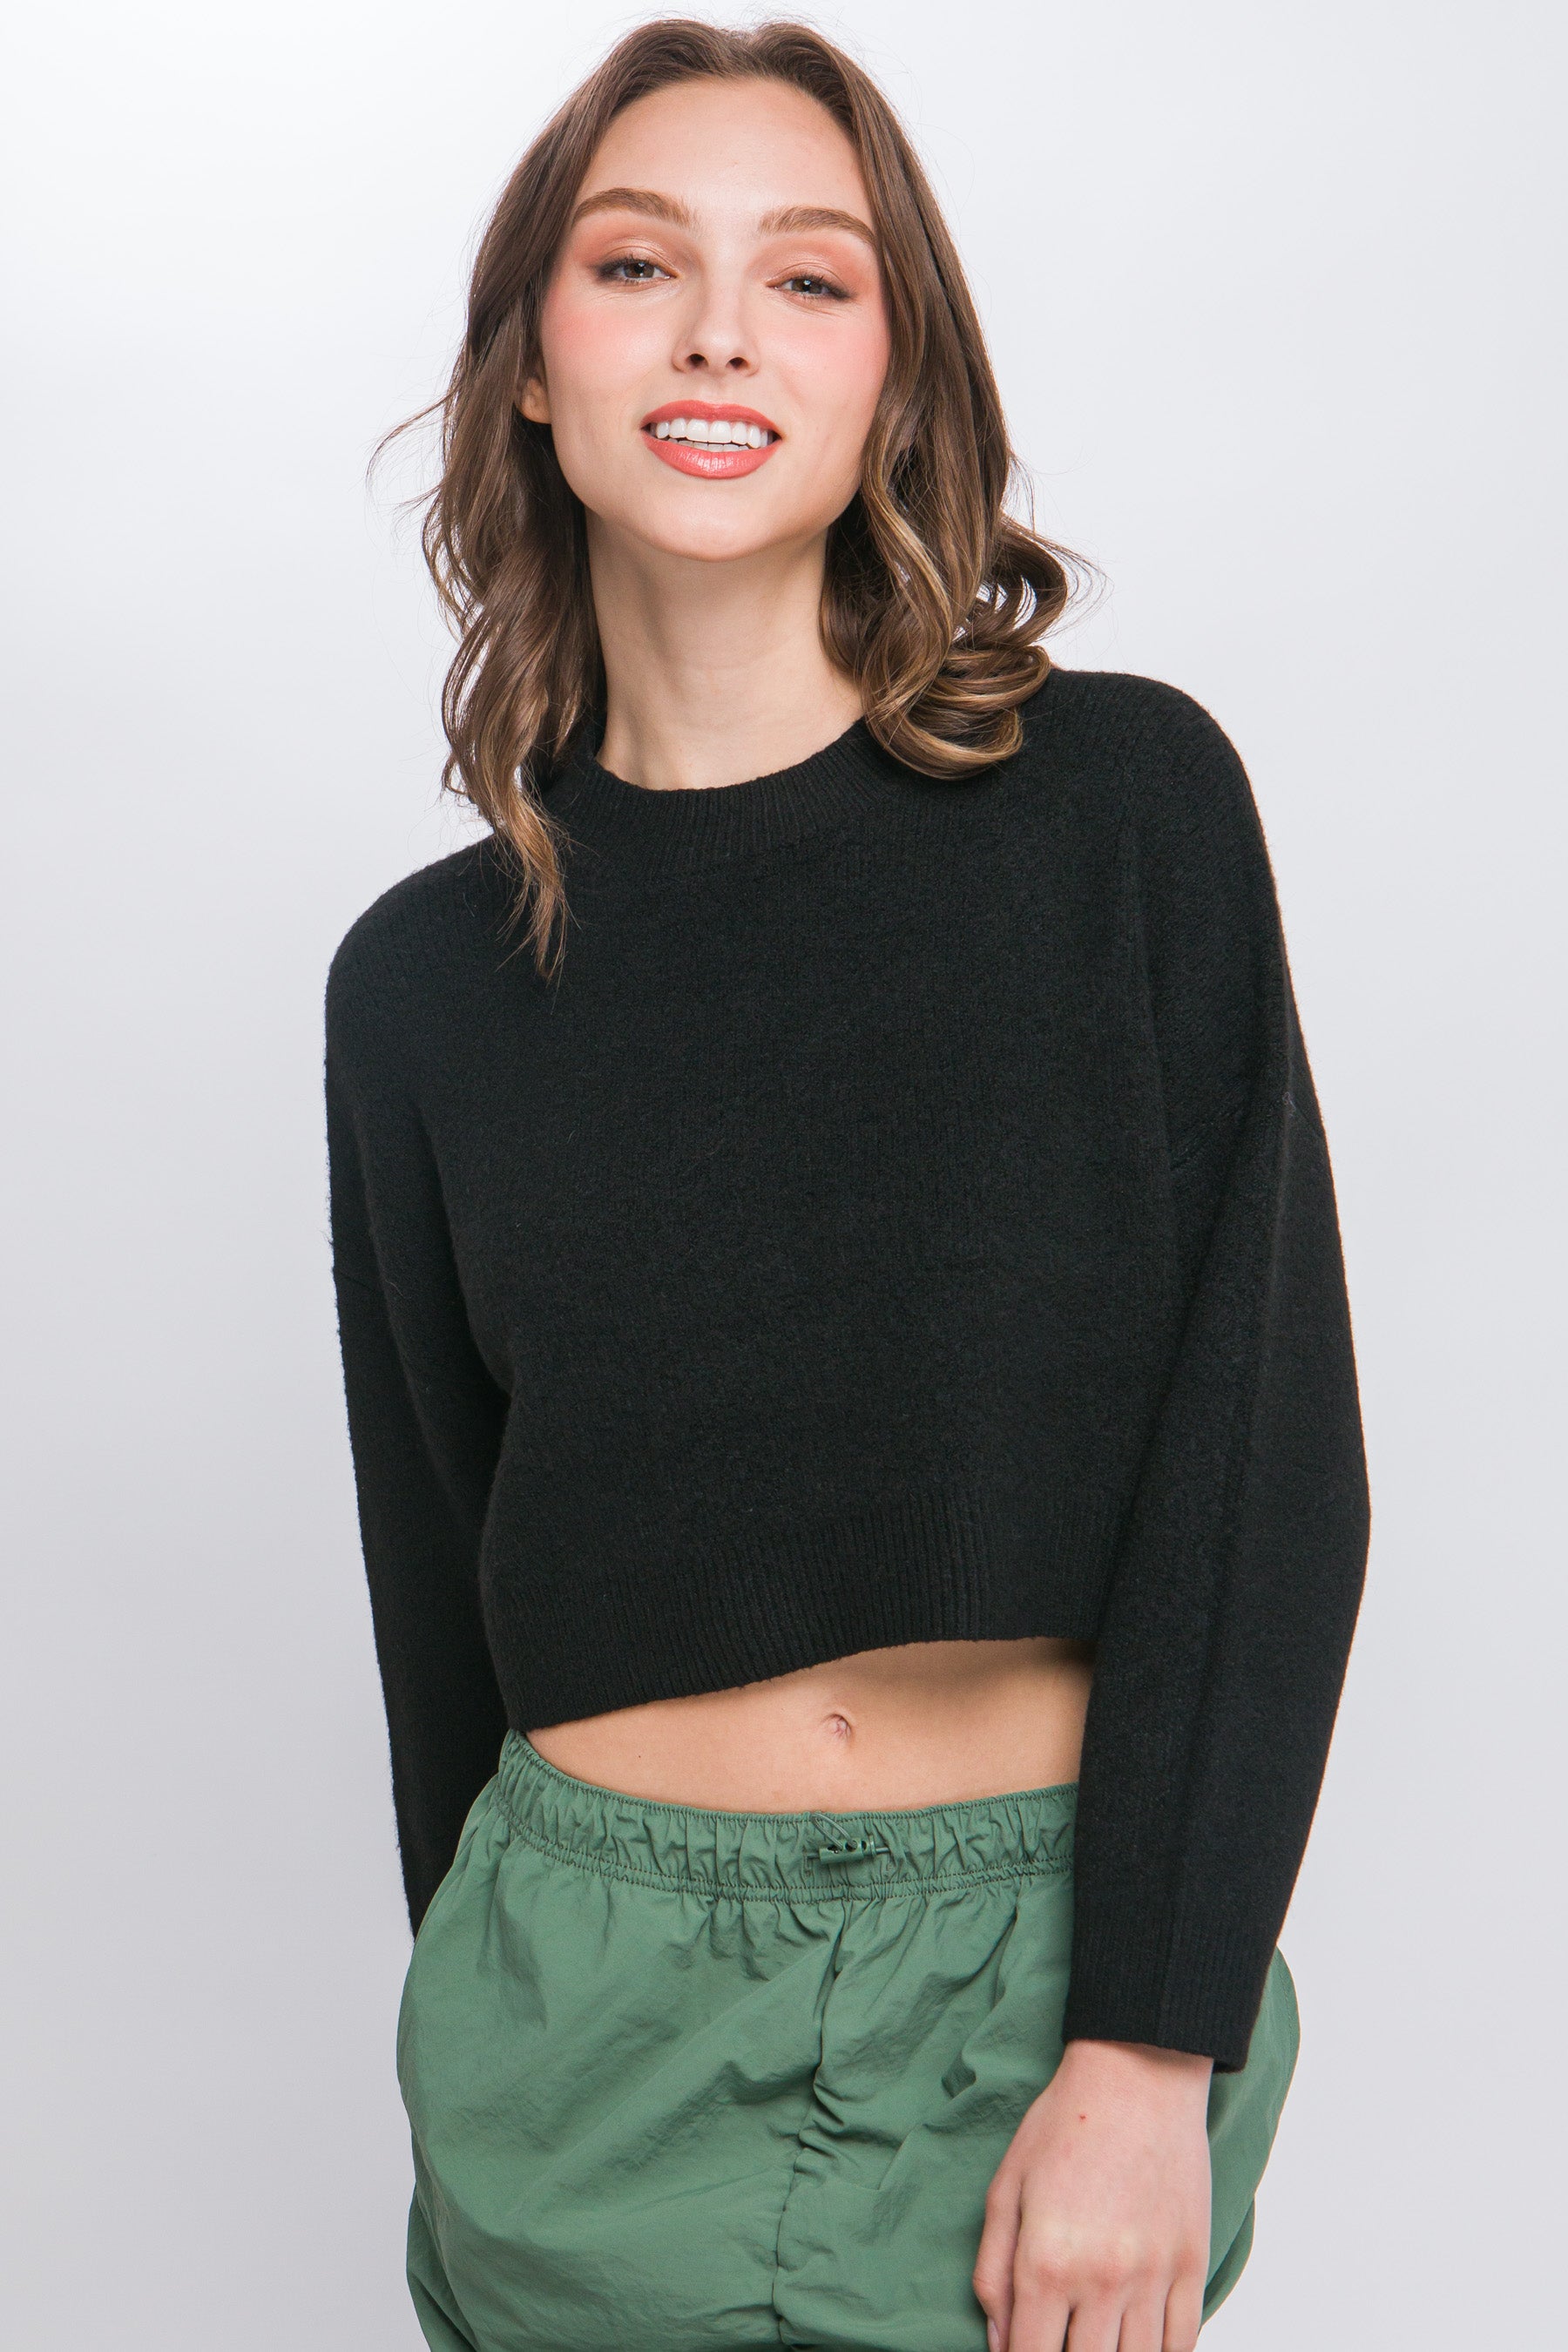 Wool Blend Cropped Sweater Top - Tigbuls Variety Fashion